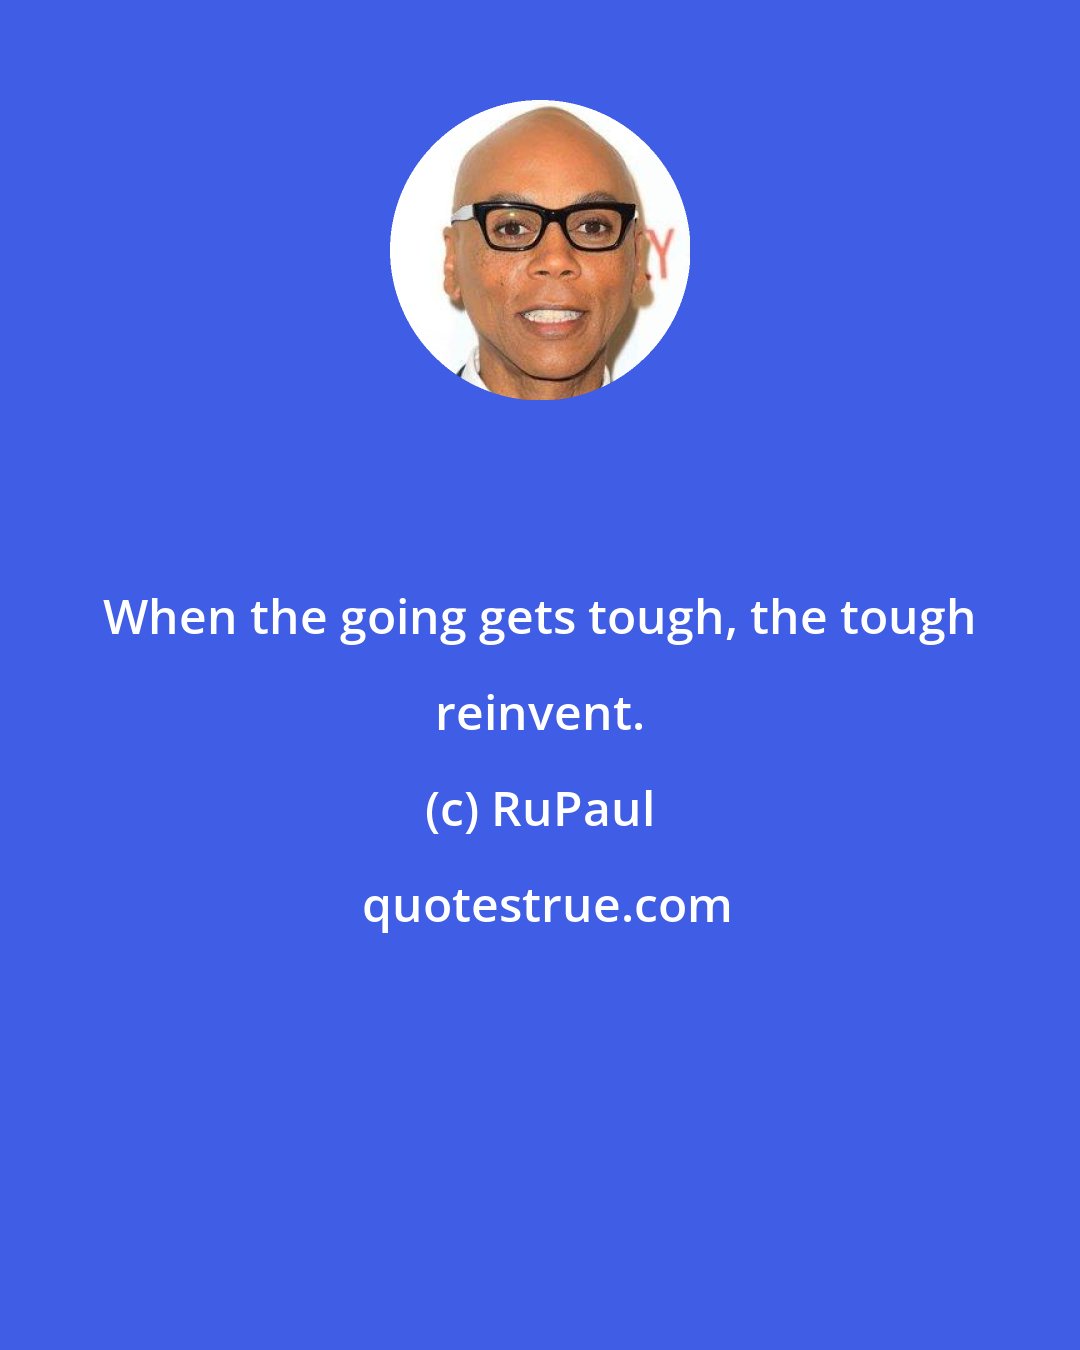 RuPaul: When the going gets tough, the tough reinvent.